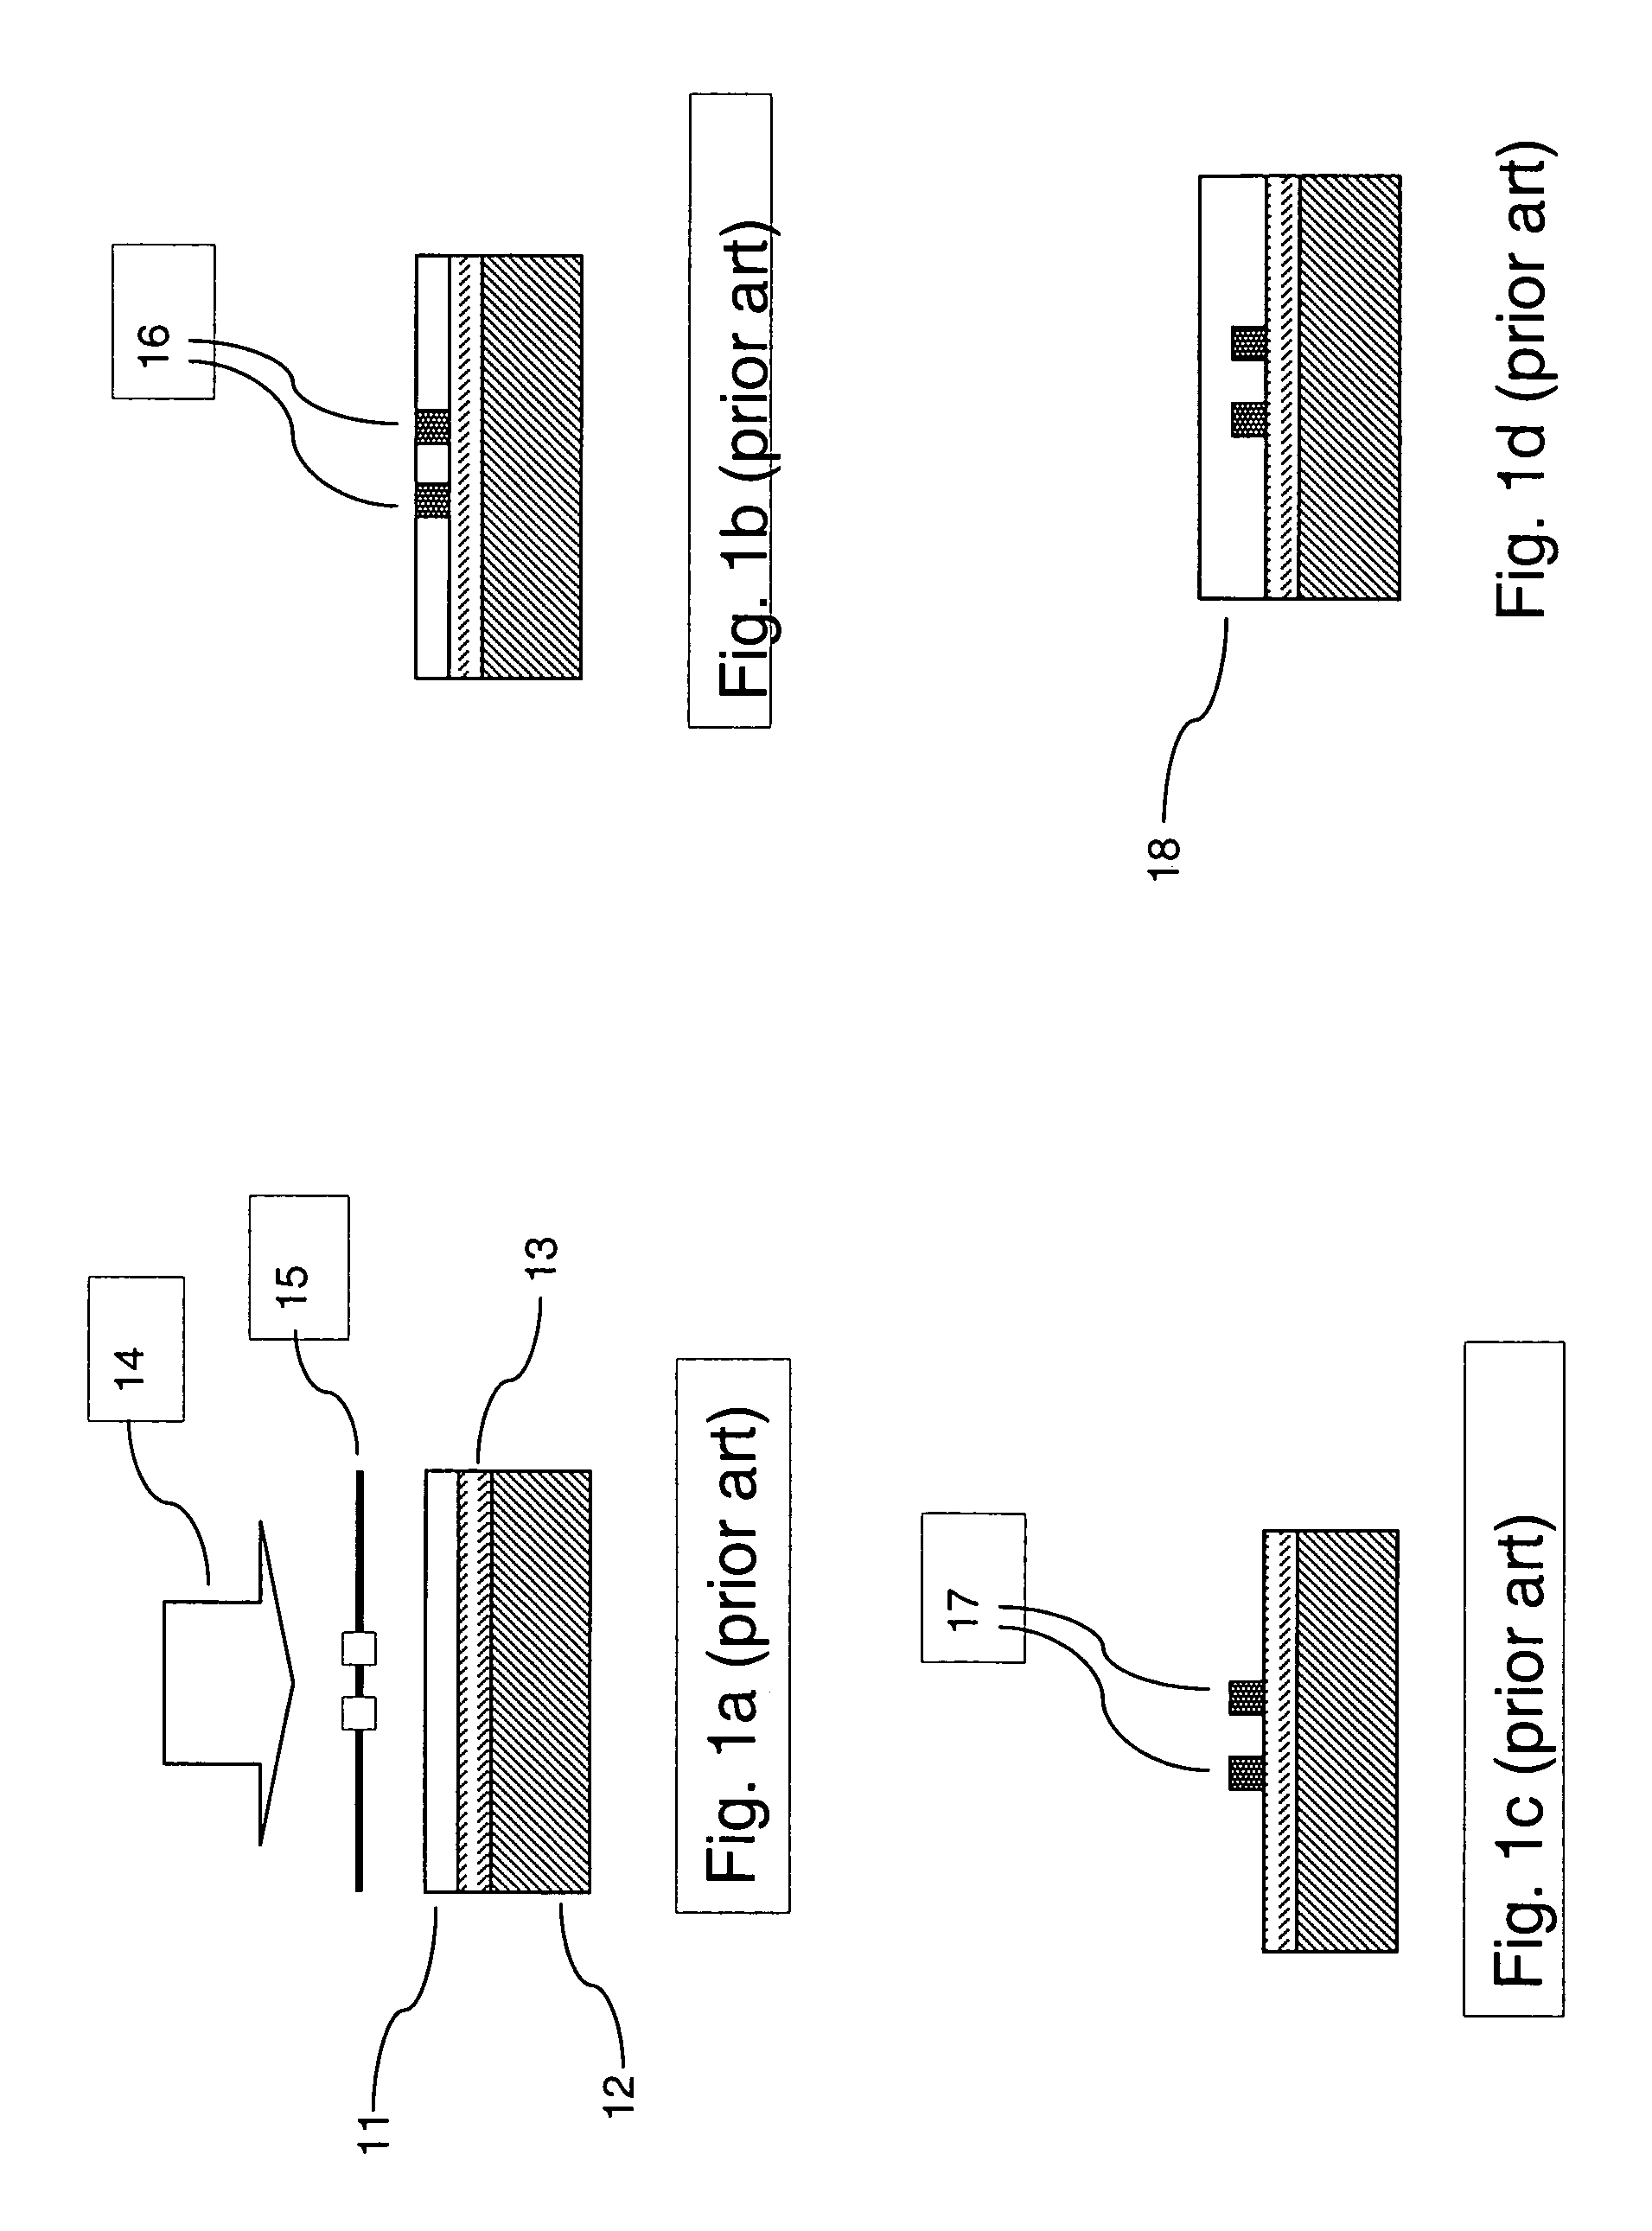 Photolithographic patterning of polymeric materials